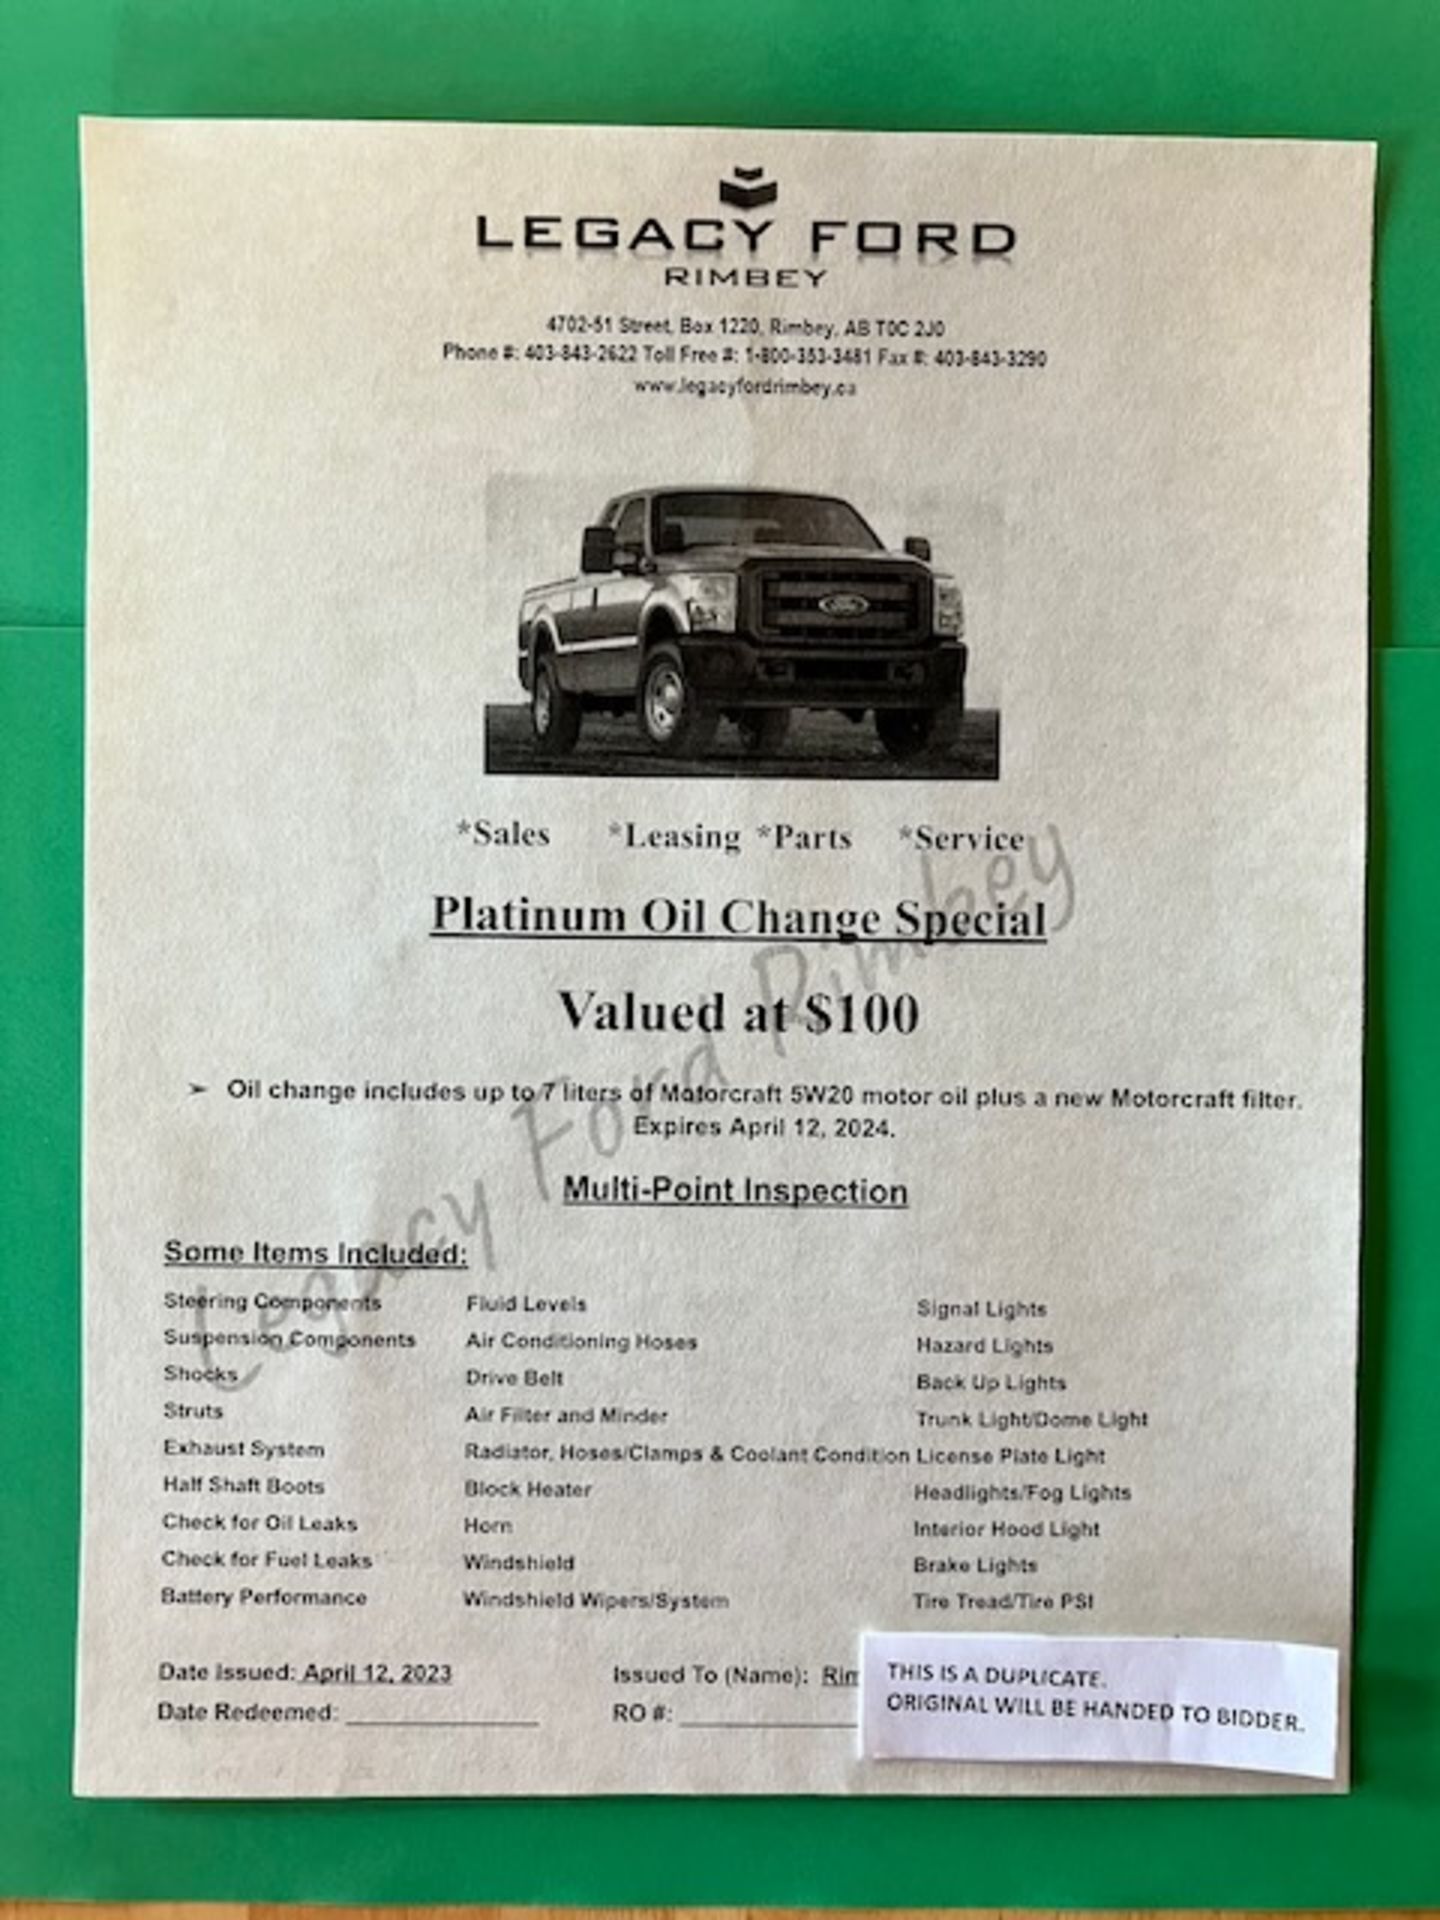 RIMBEY LEGACY FORD PLATINUM OIL CHANGE GIFT CERTIFICATE